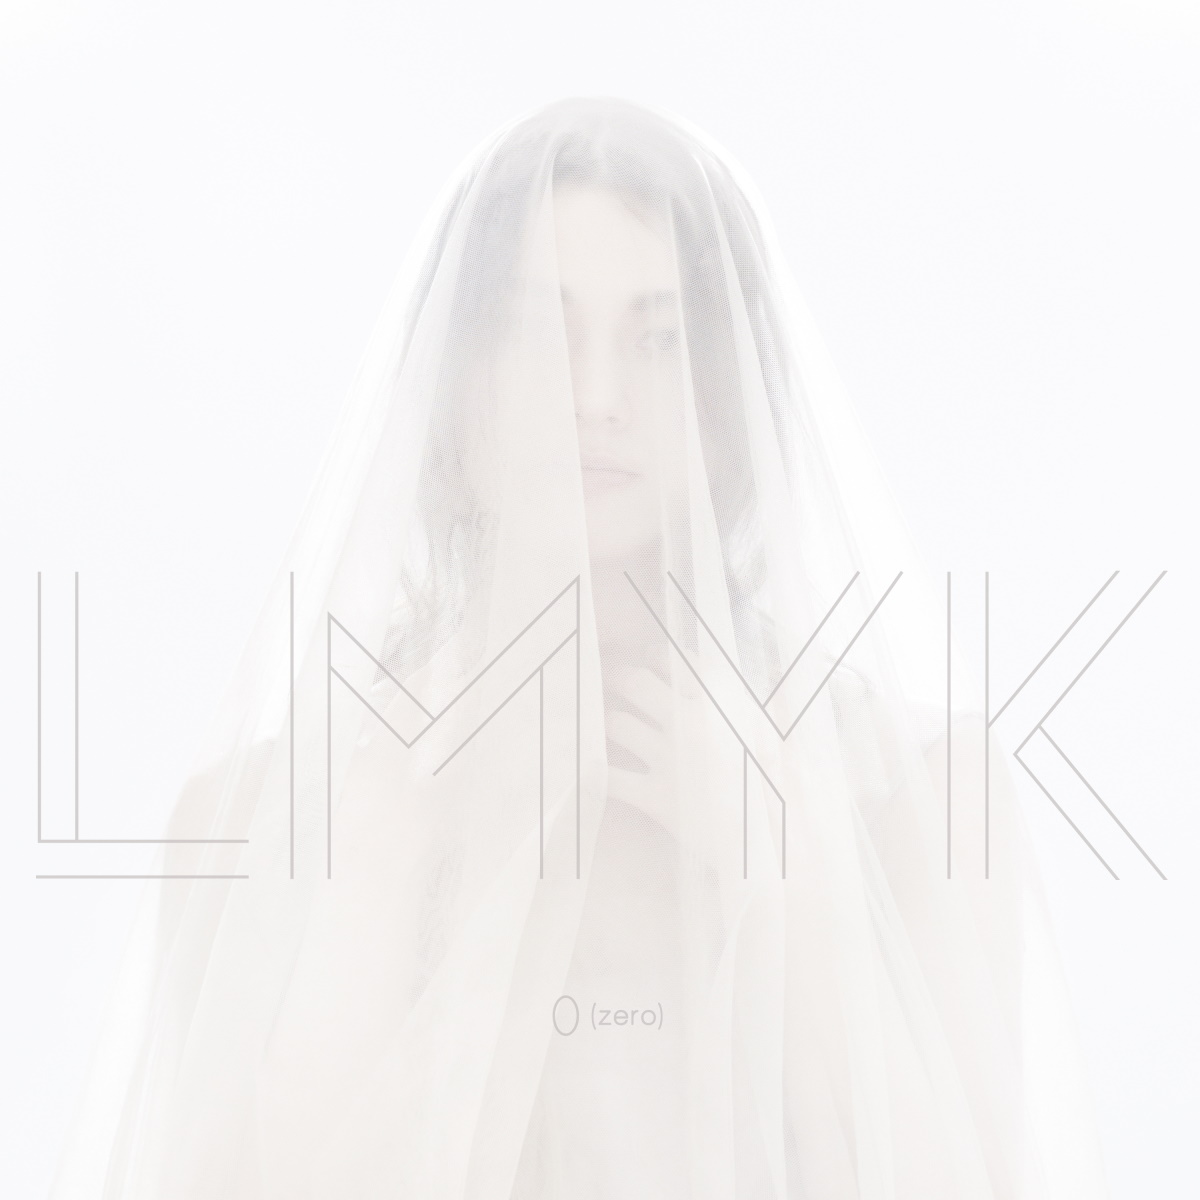 Cover art for『LMYK - 0 (zero) -English version』from the release『0(zero)』